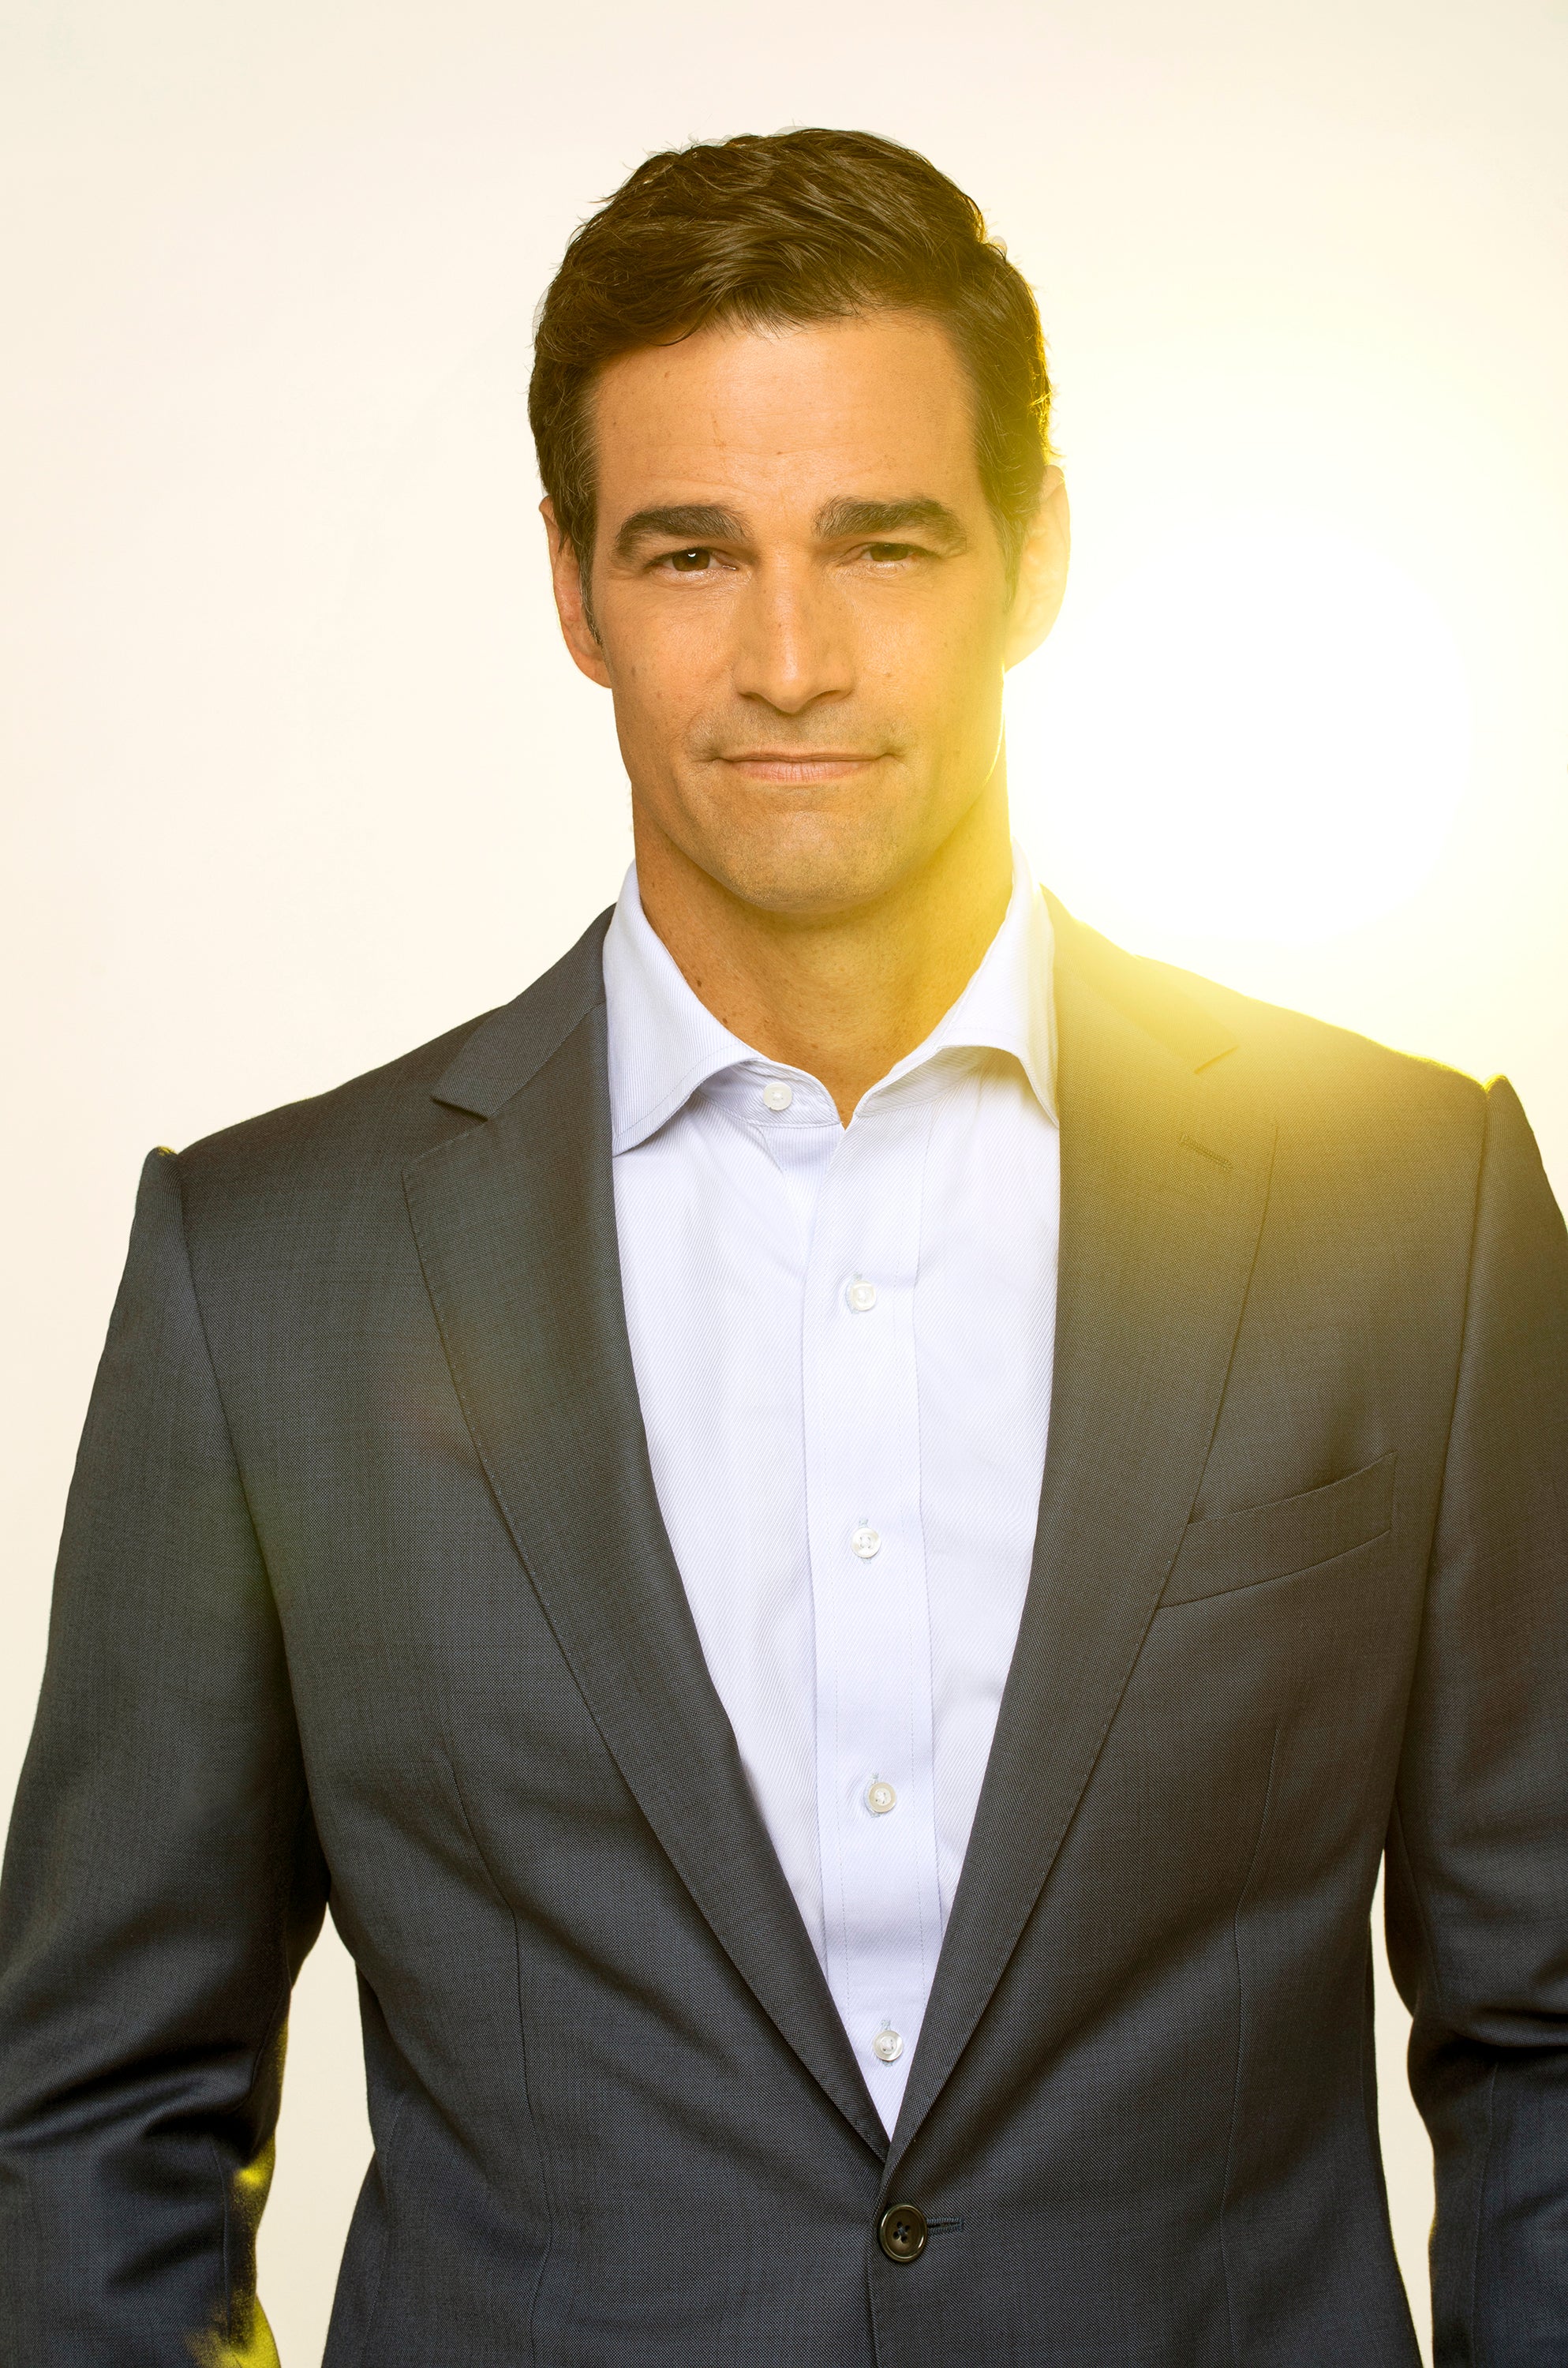 Rob Marciano was reportedly fired from ABC News after a shouting match with a producer